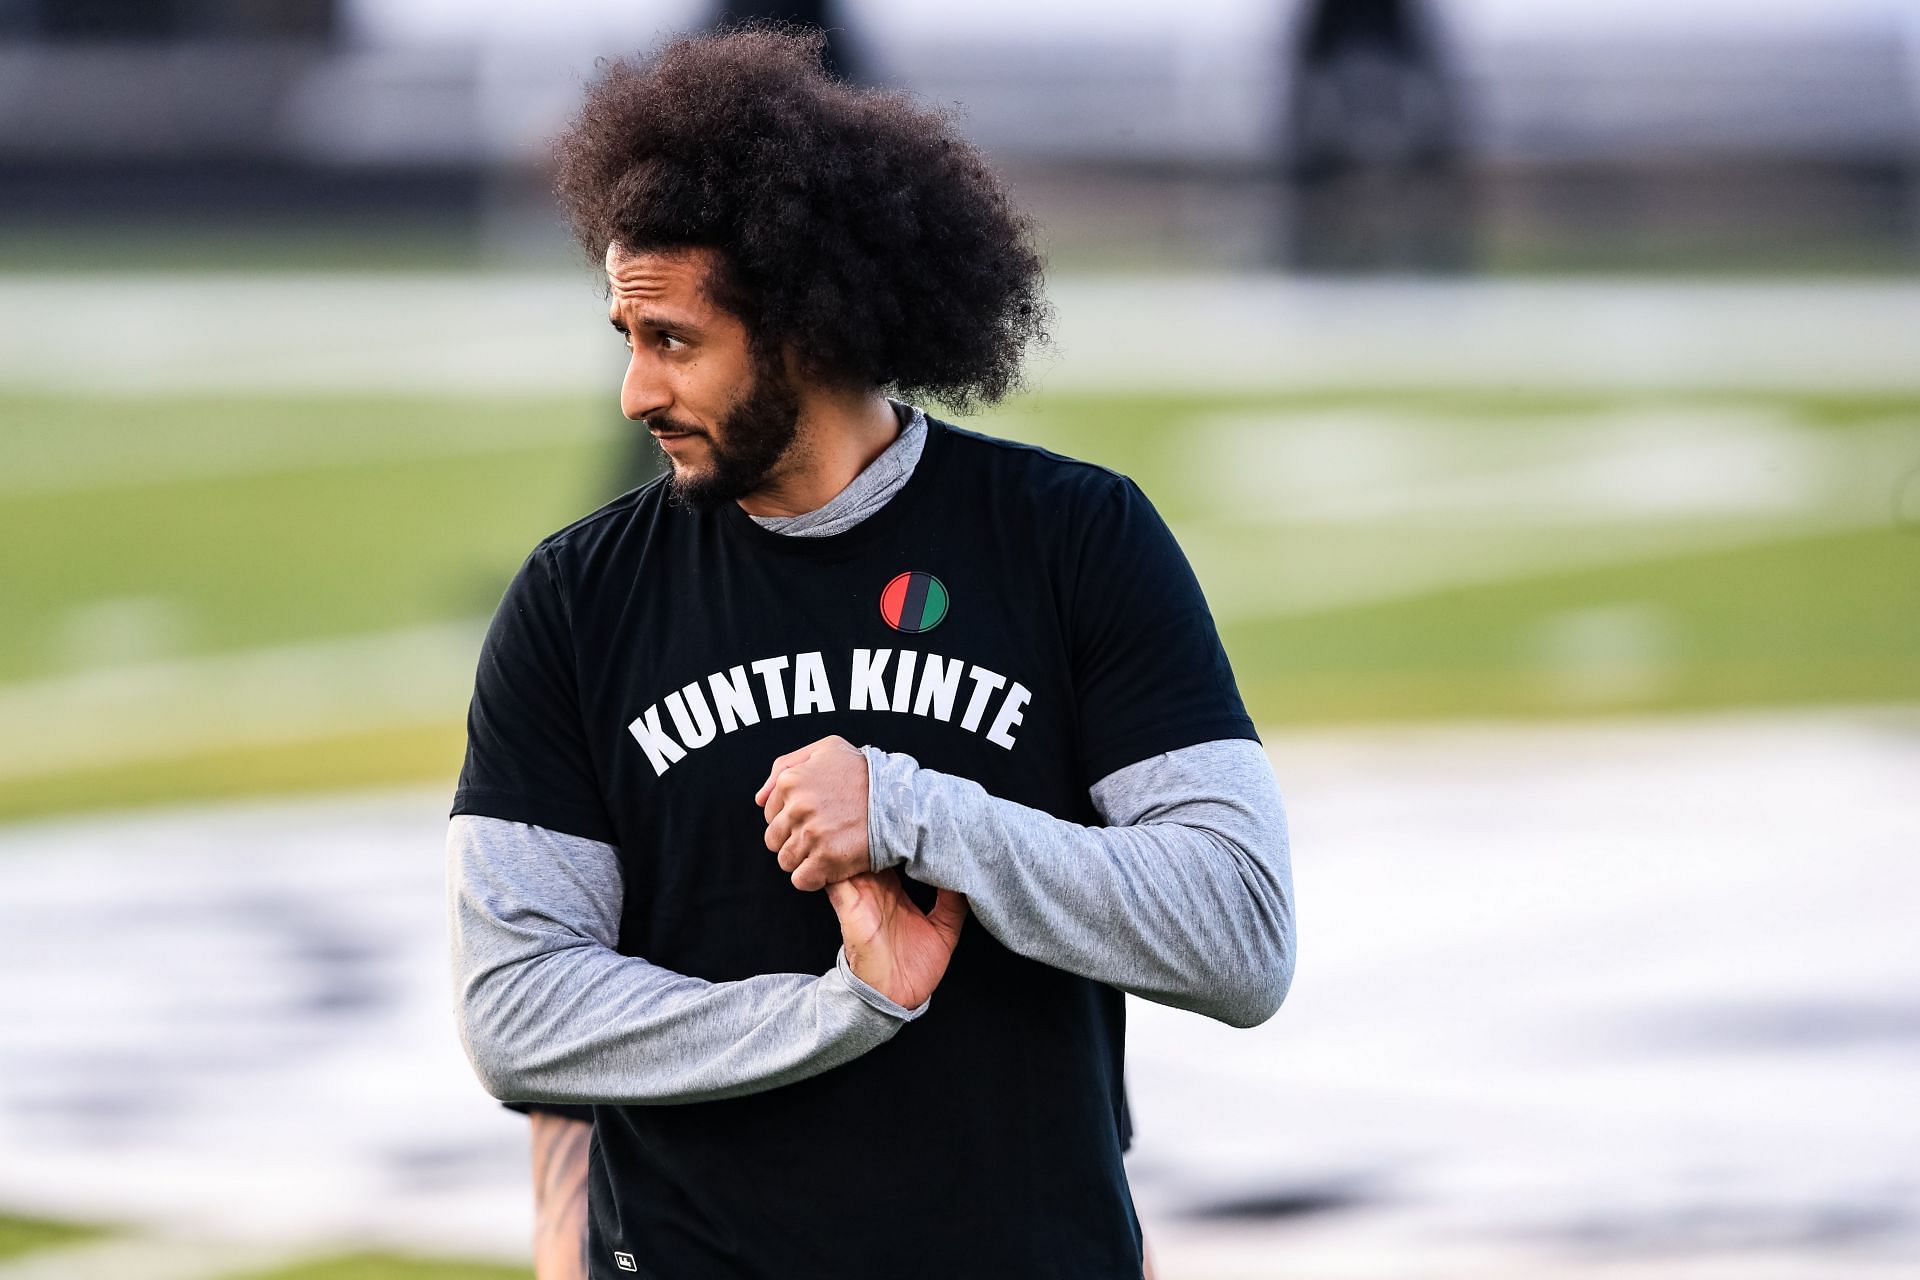 Colin Kaepernick last played an NFL game back in 2017